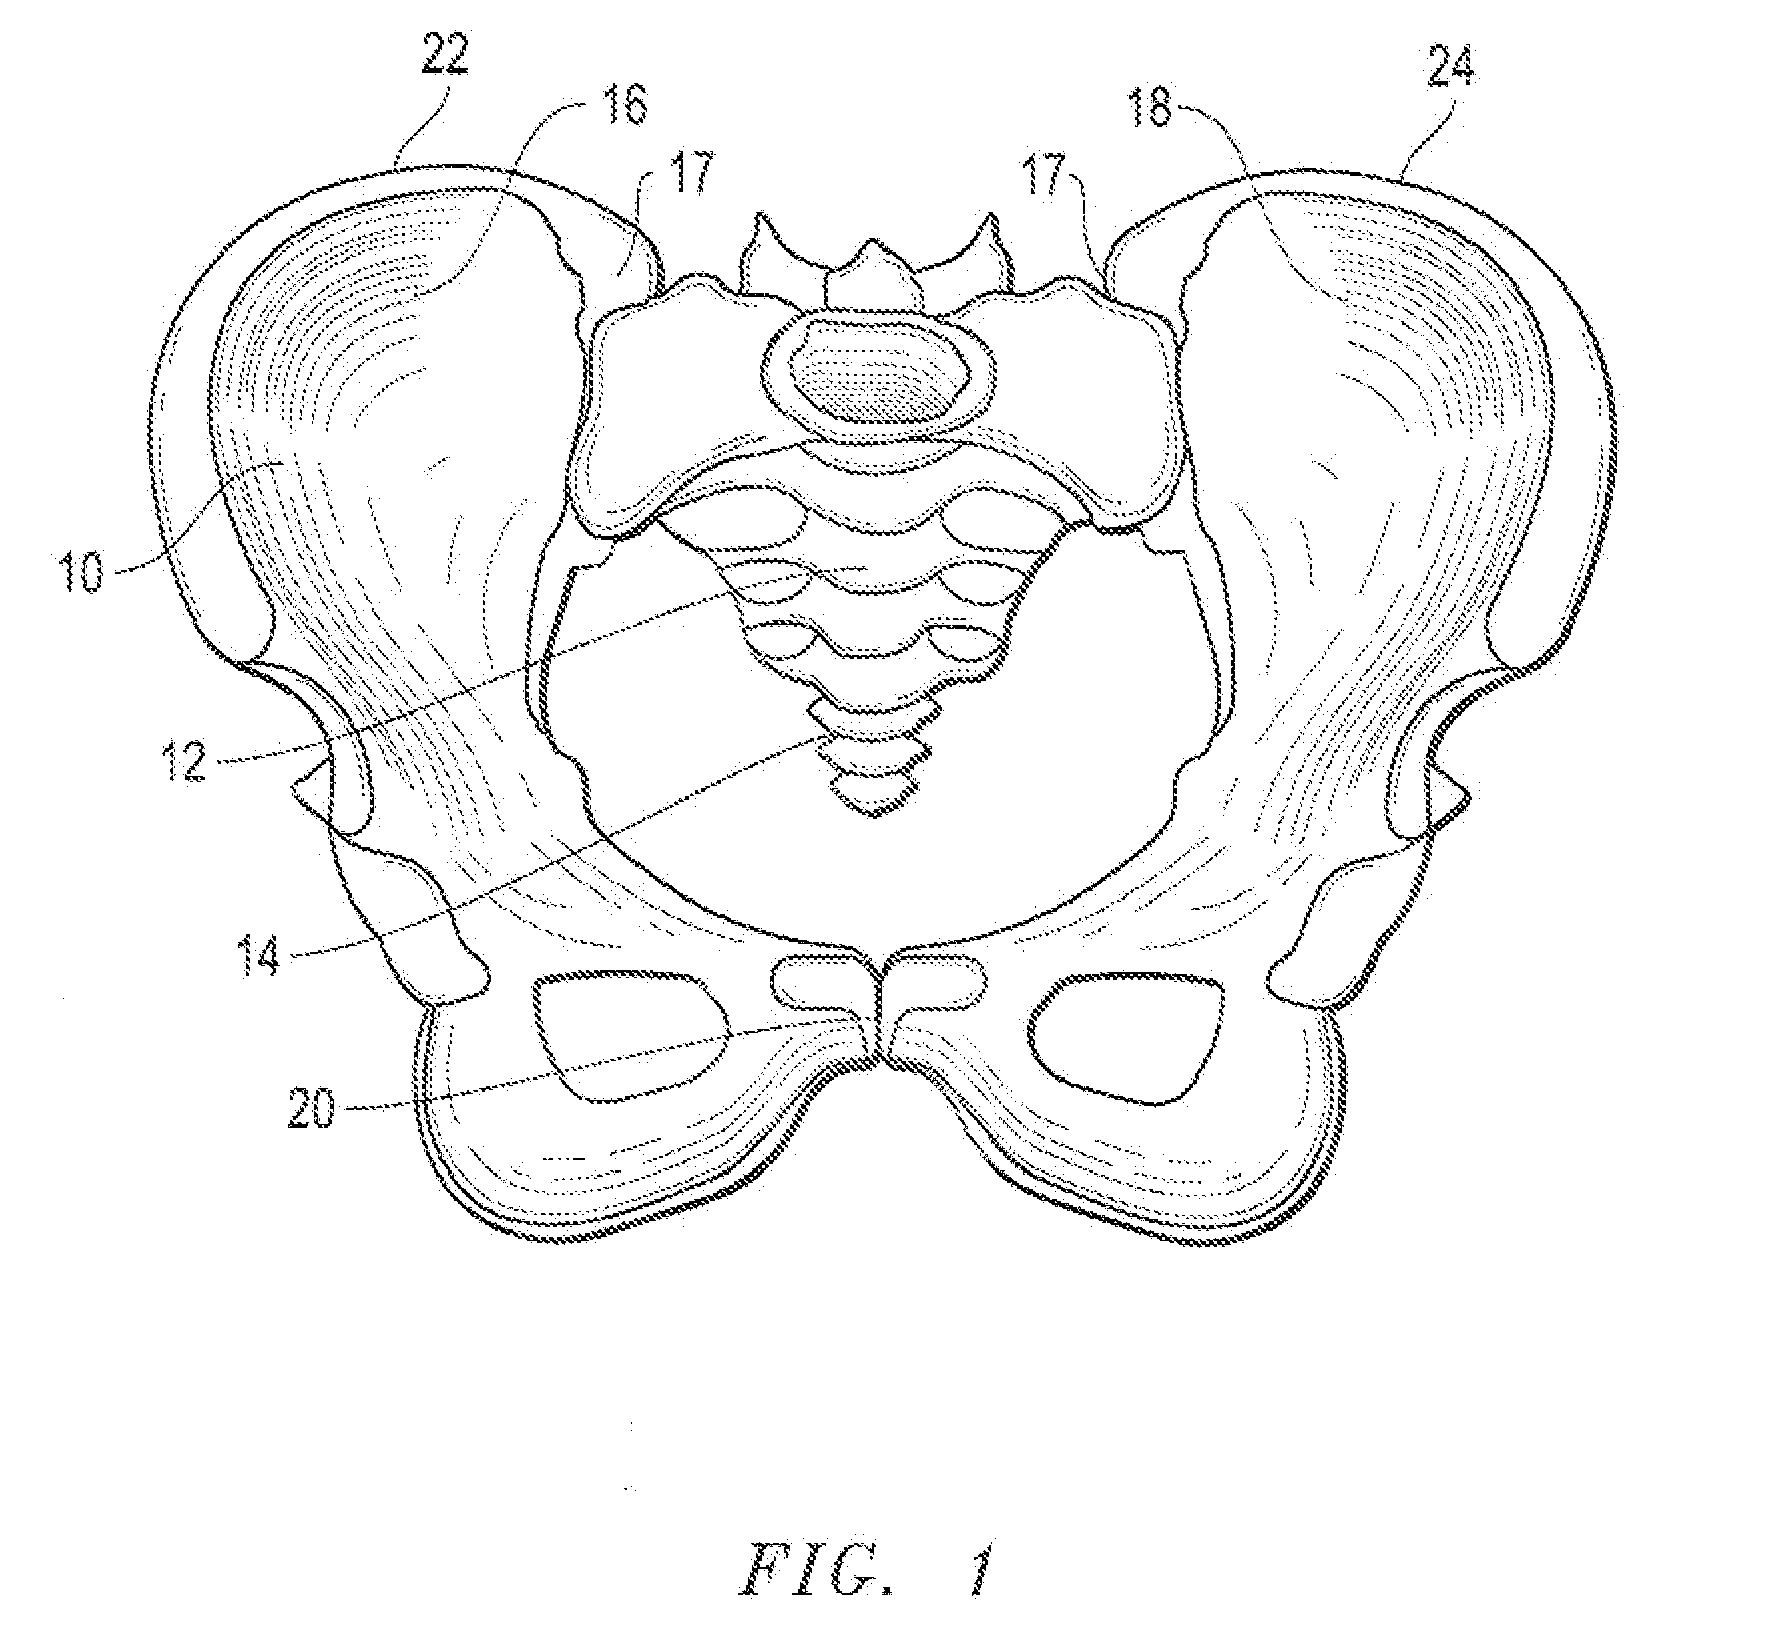 Adjustable pelvic compression belt and methods for reducing the width of, and/or realigning, a user's hips